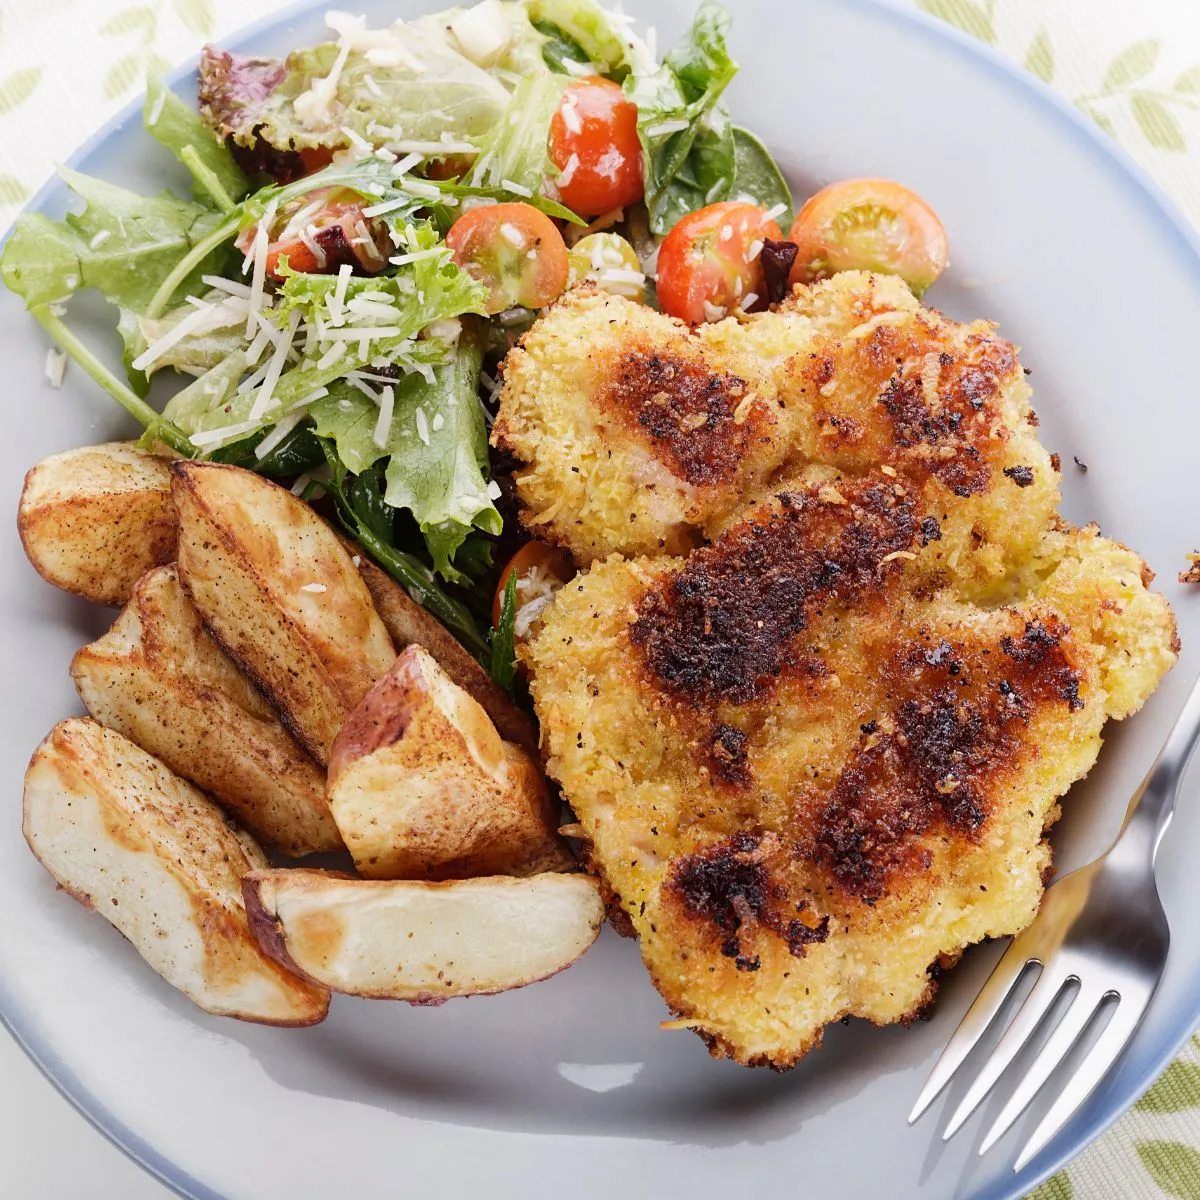 Parmesan chicken with potato wedges and green salad